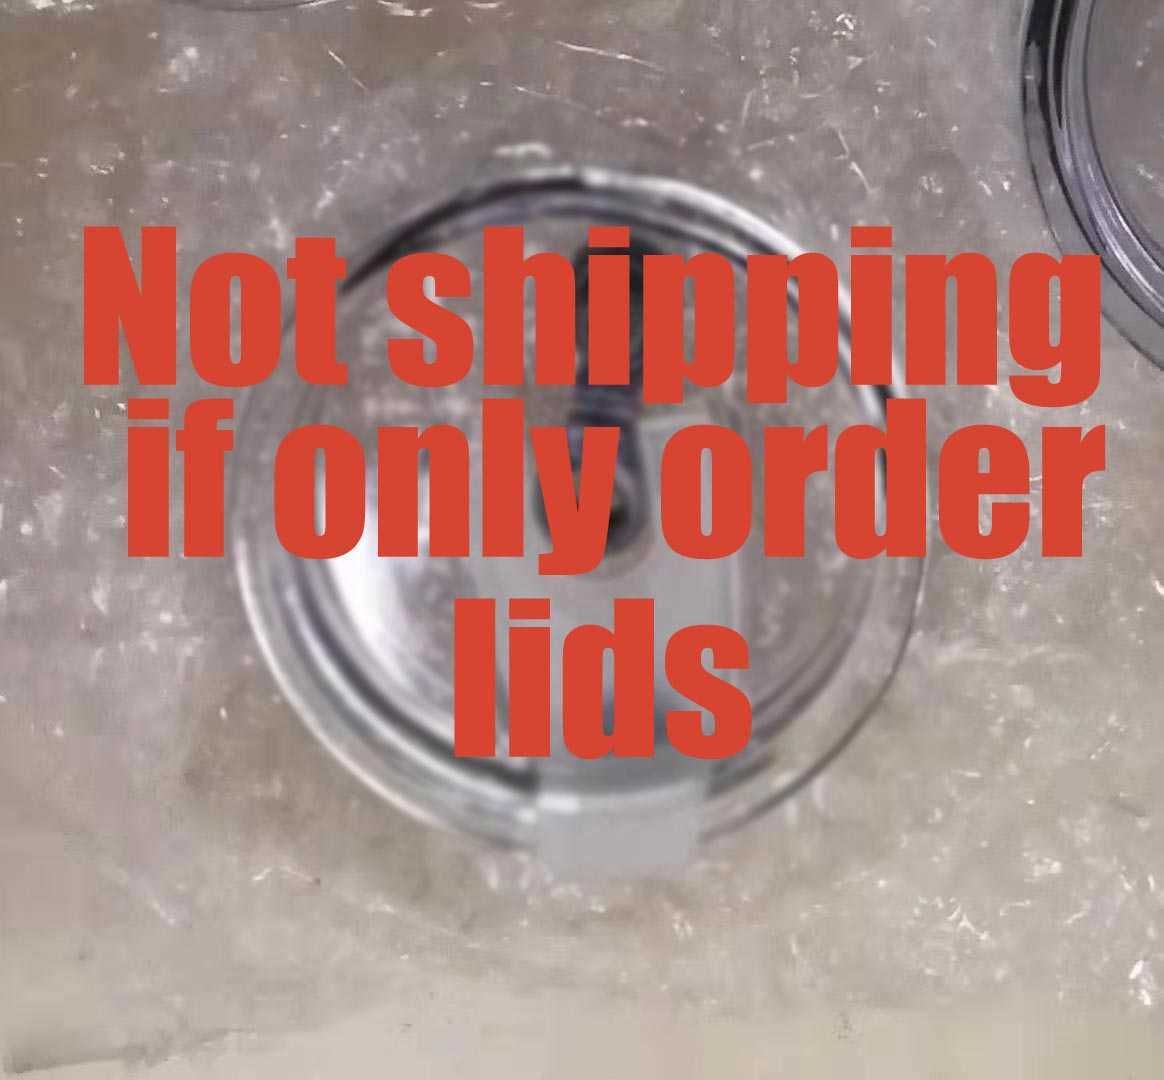 Lids (not Ship If Only Order Lids)